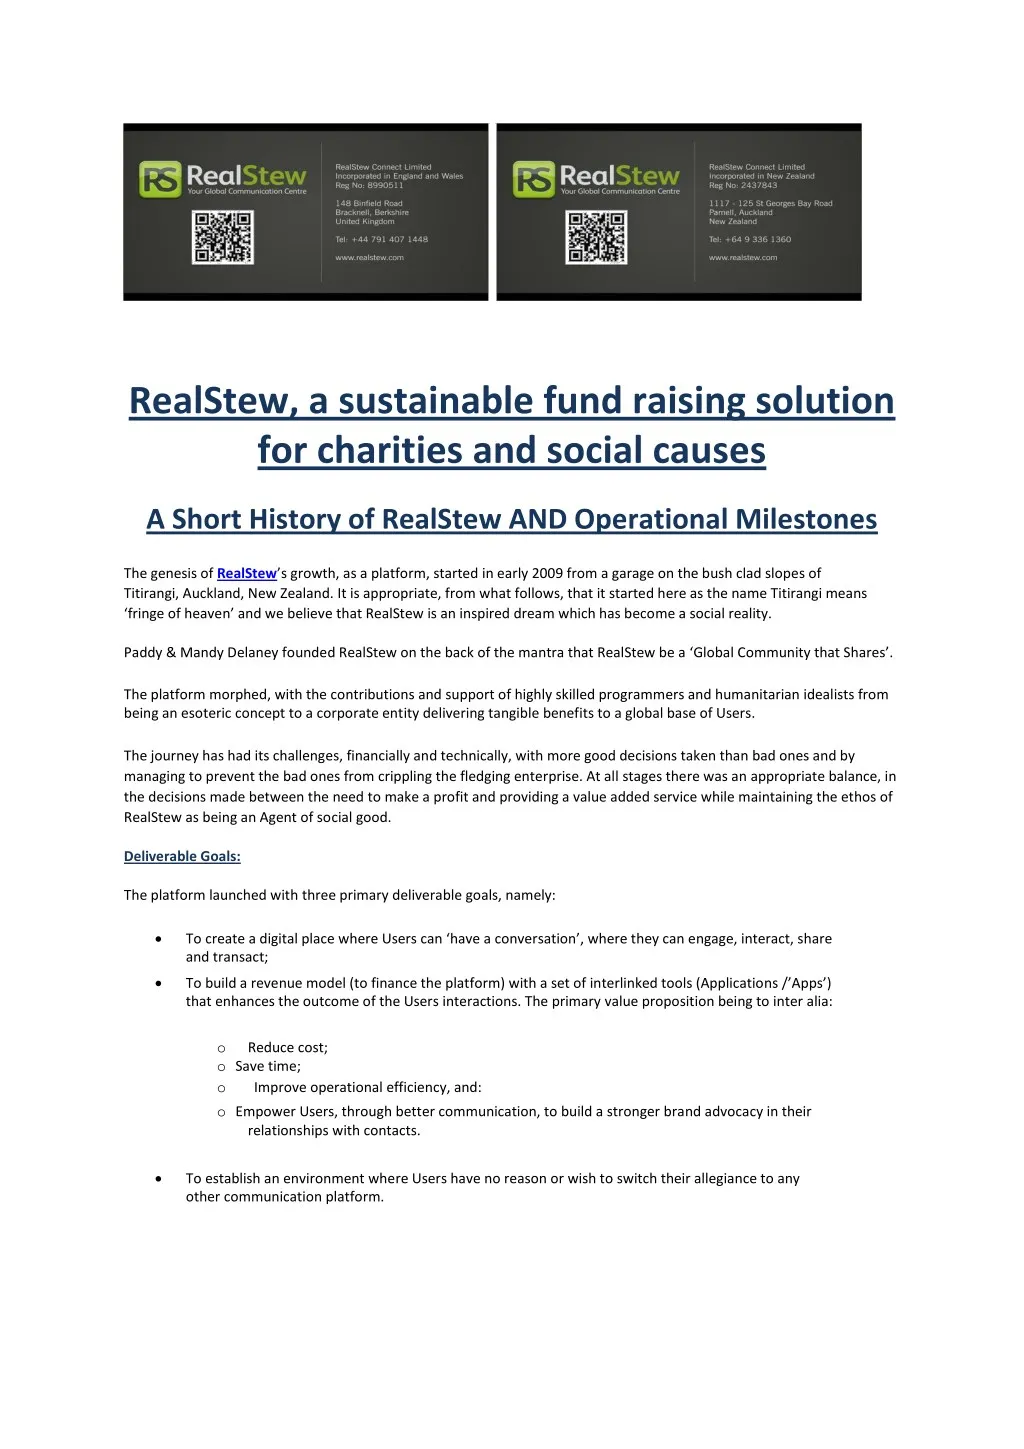 realstew a sustainable fund raising solution